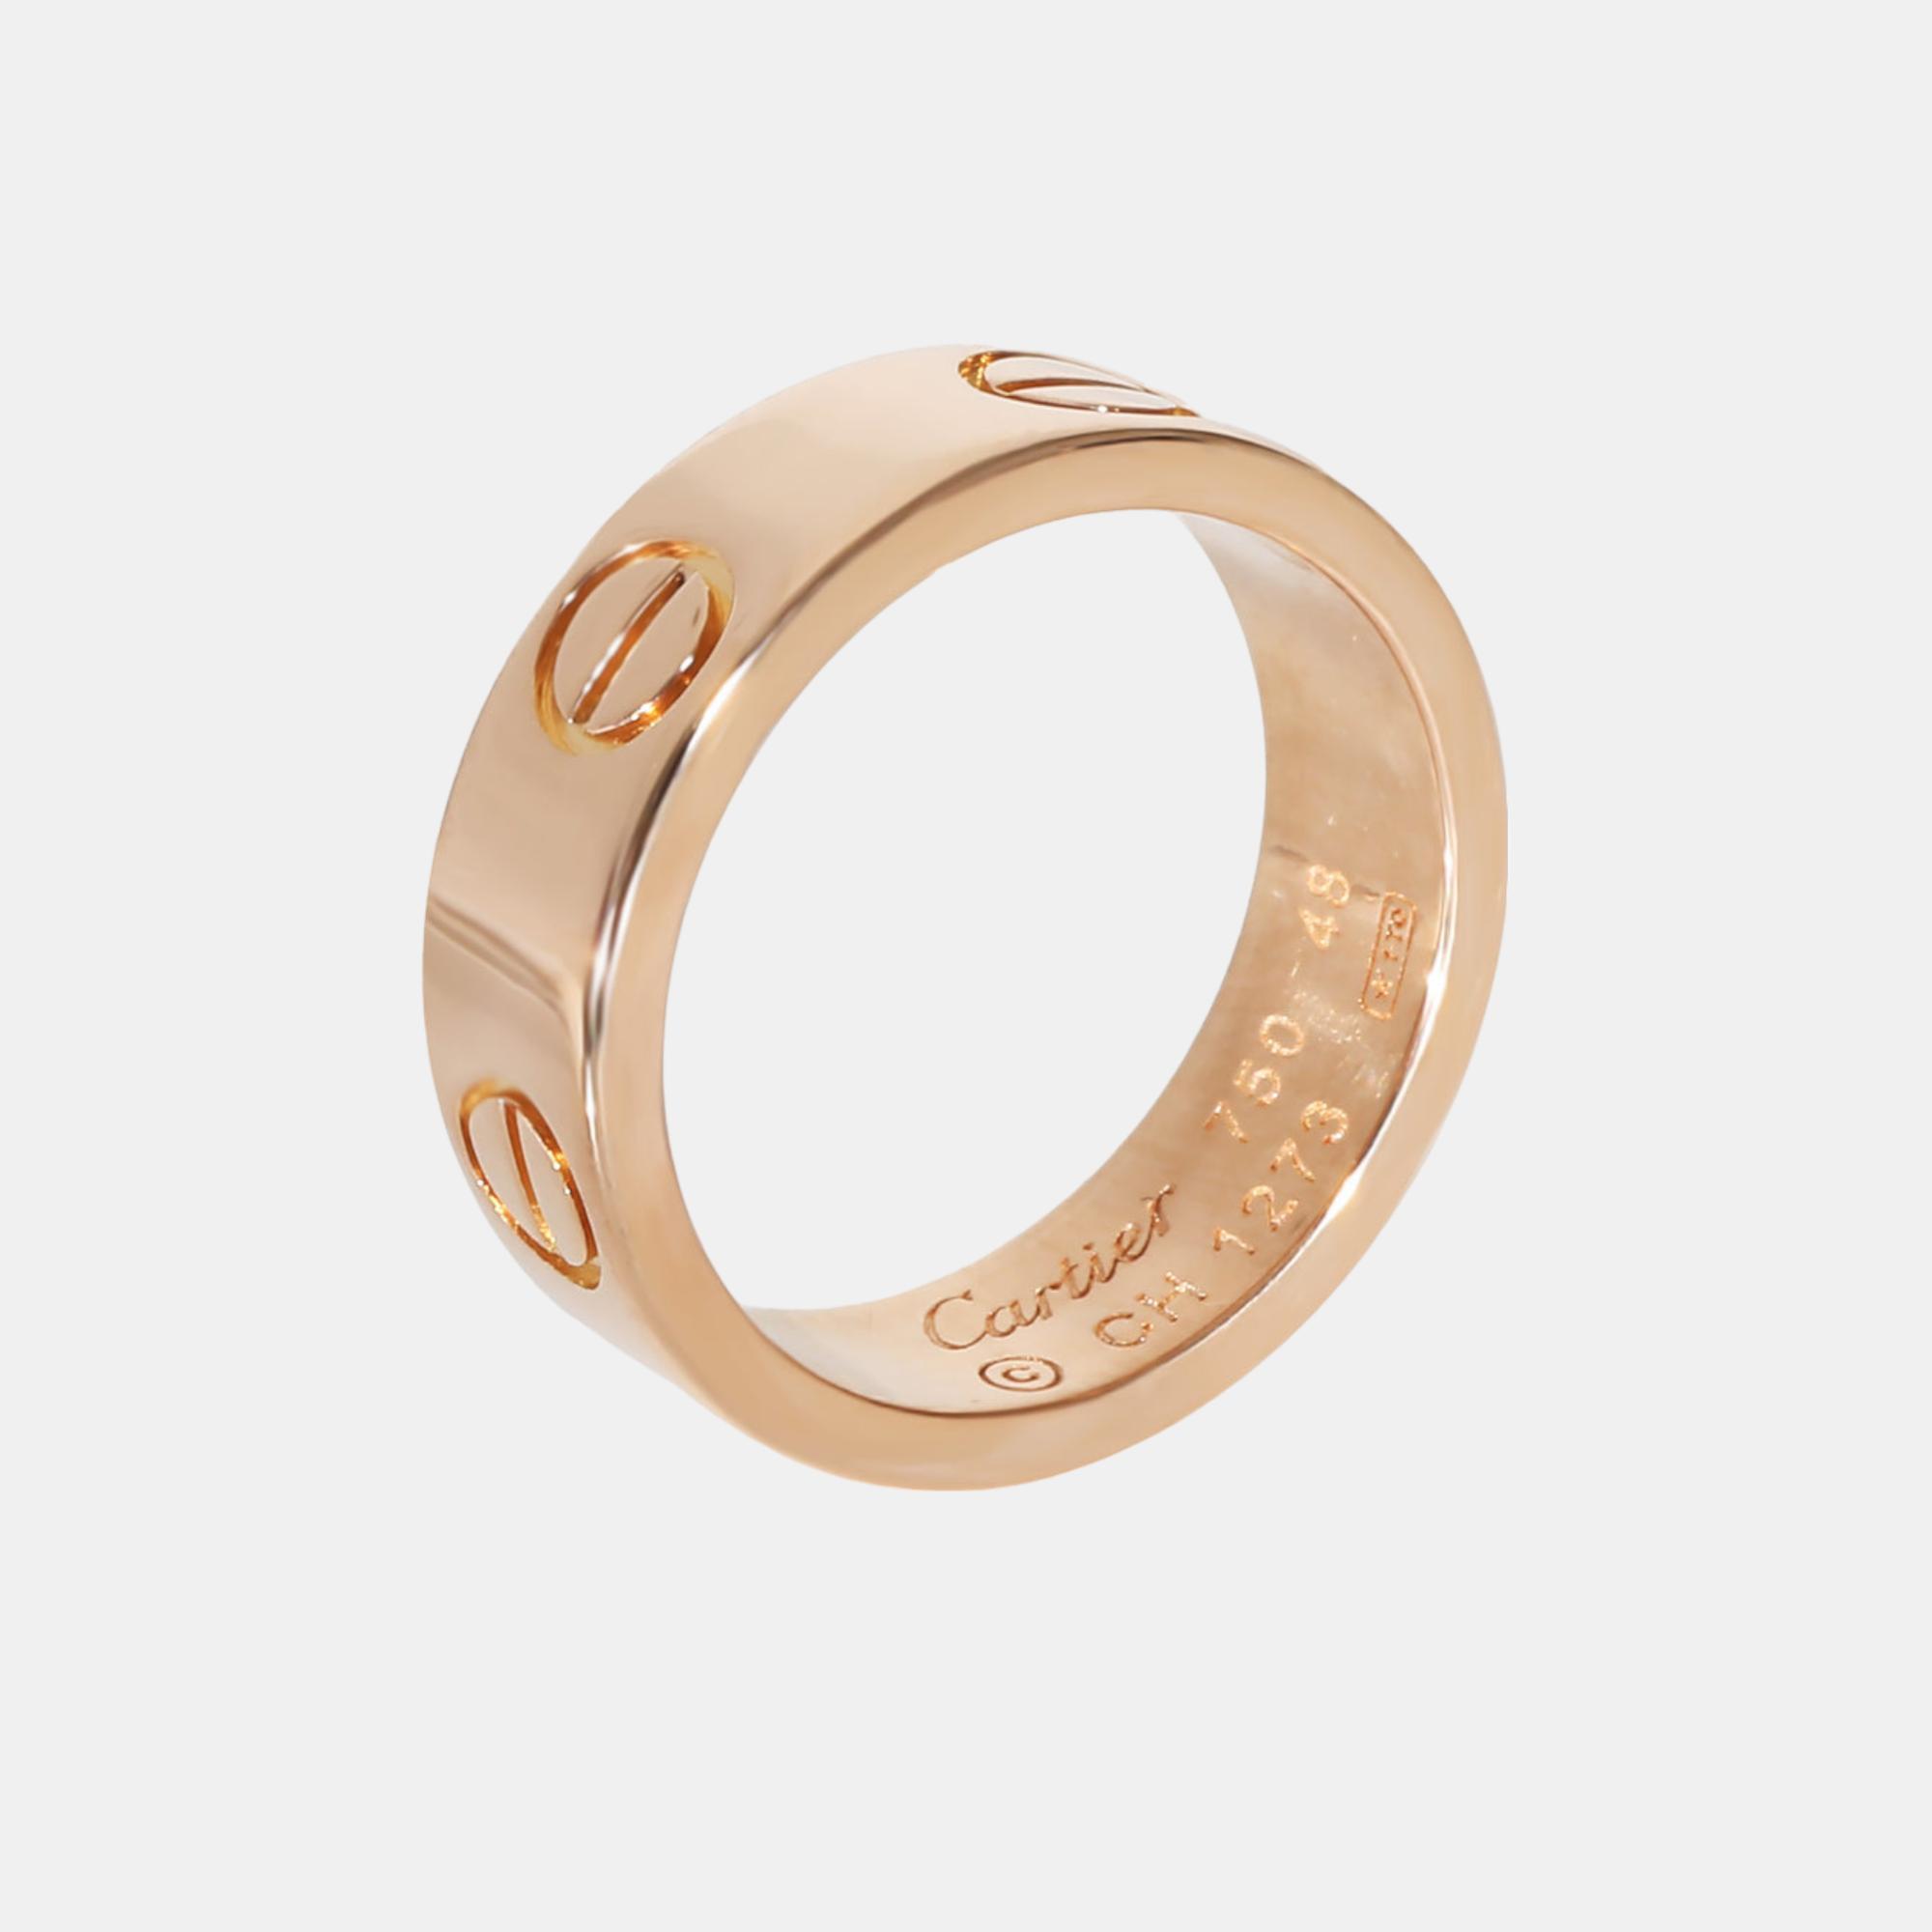 Cartier love fashion ring in 18k rose gold